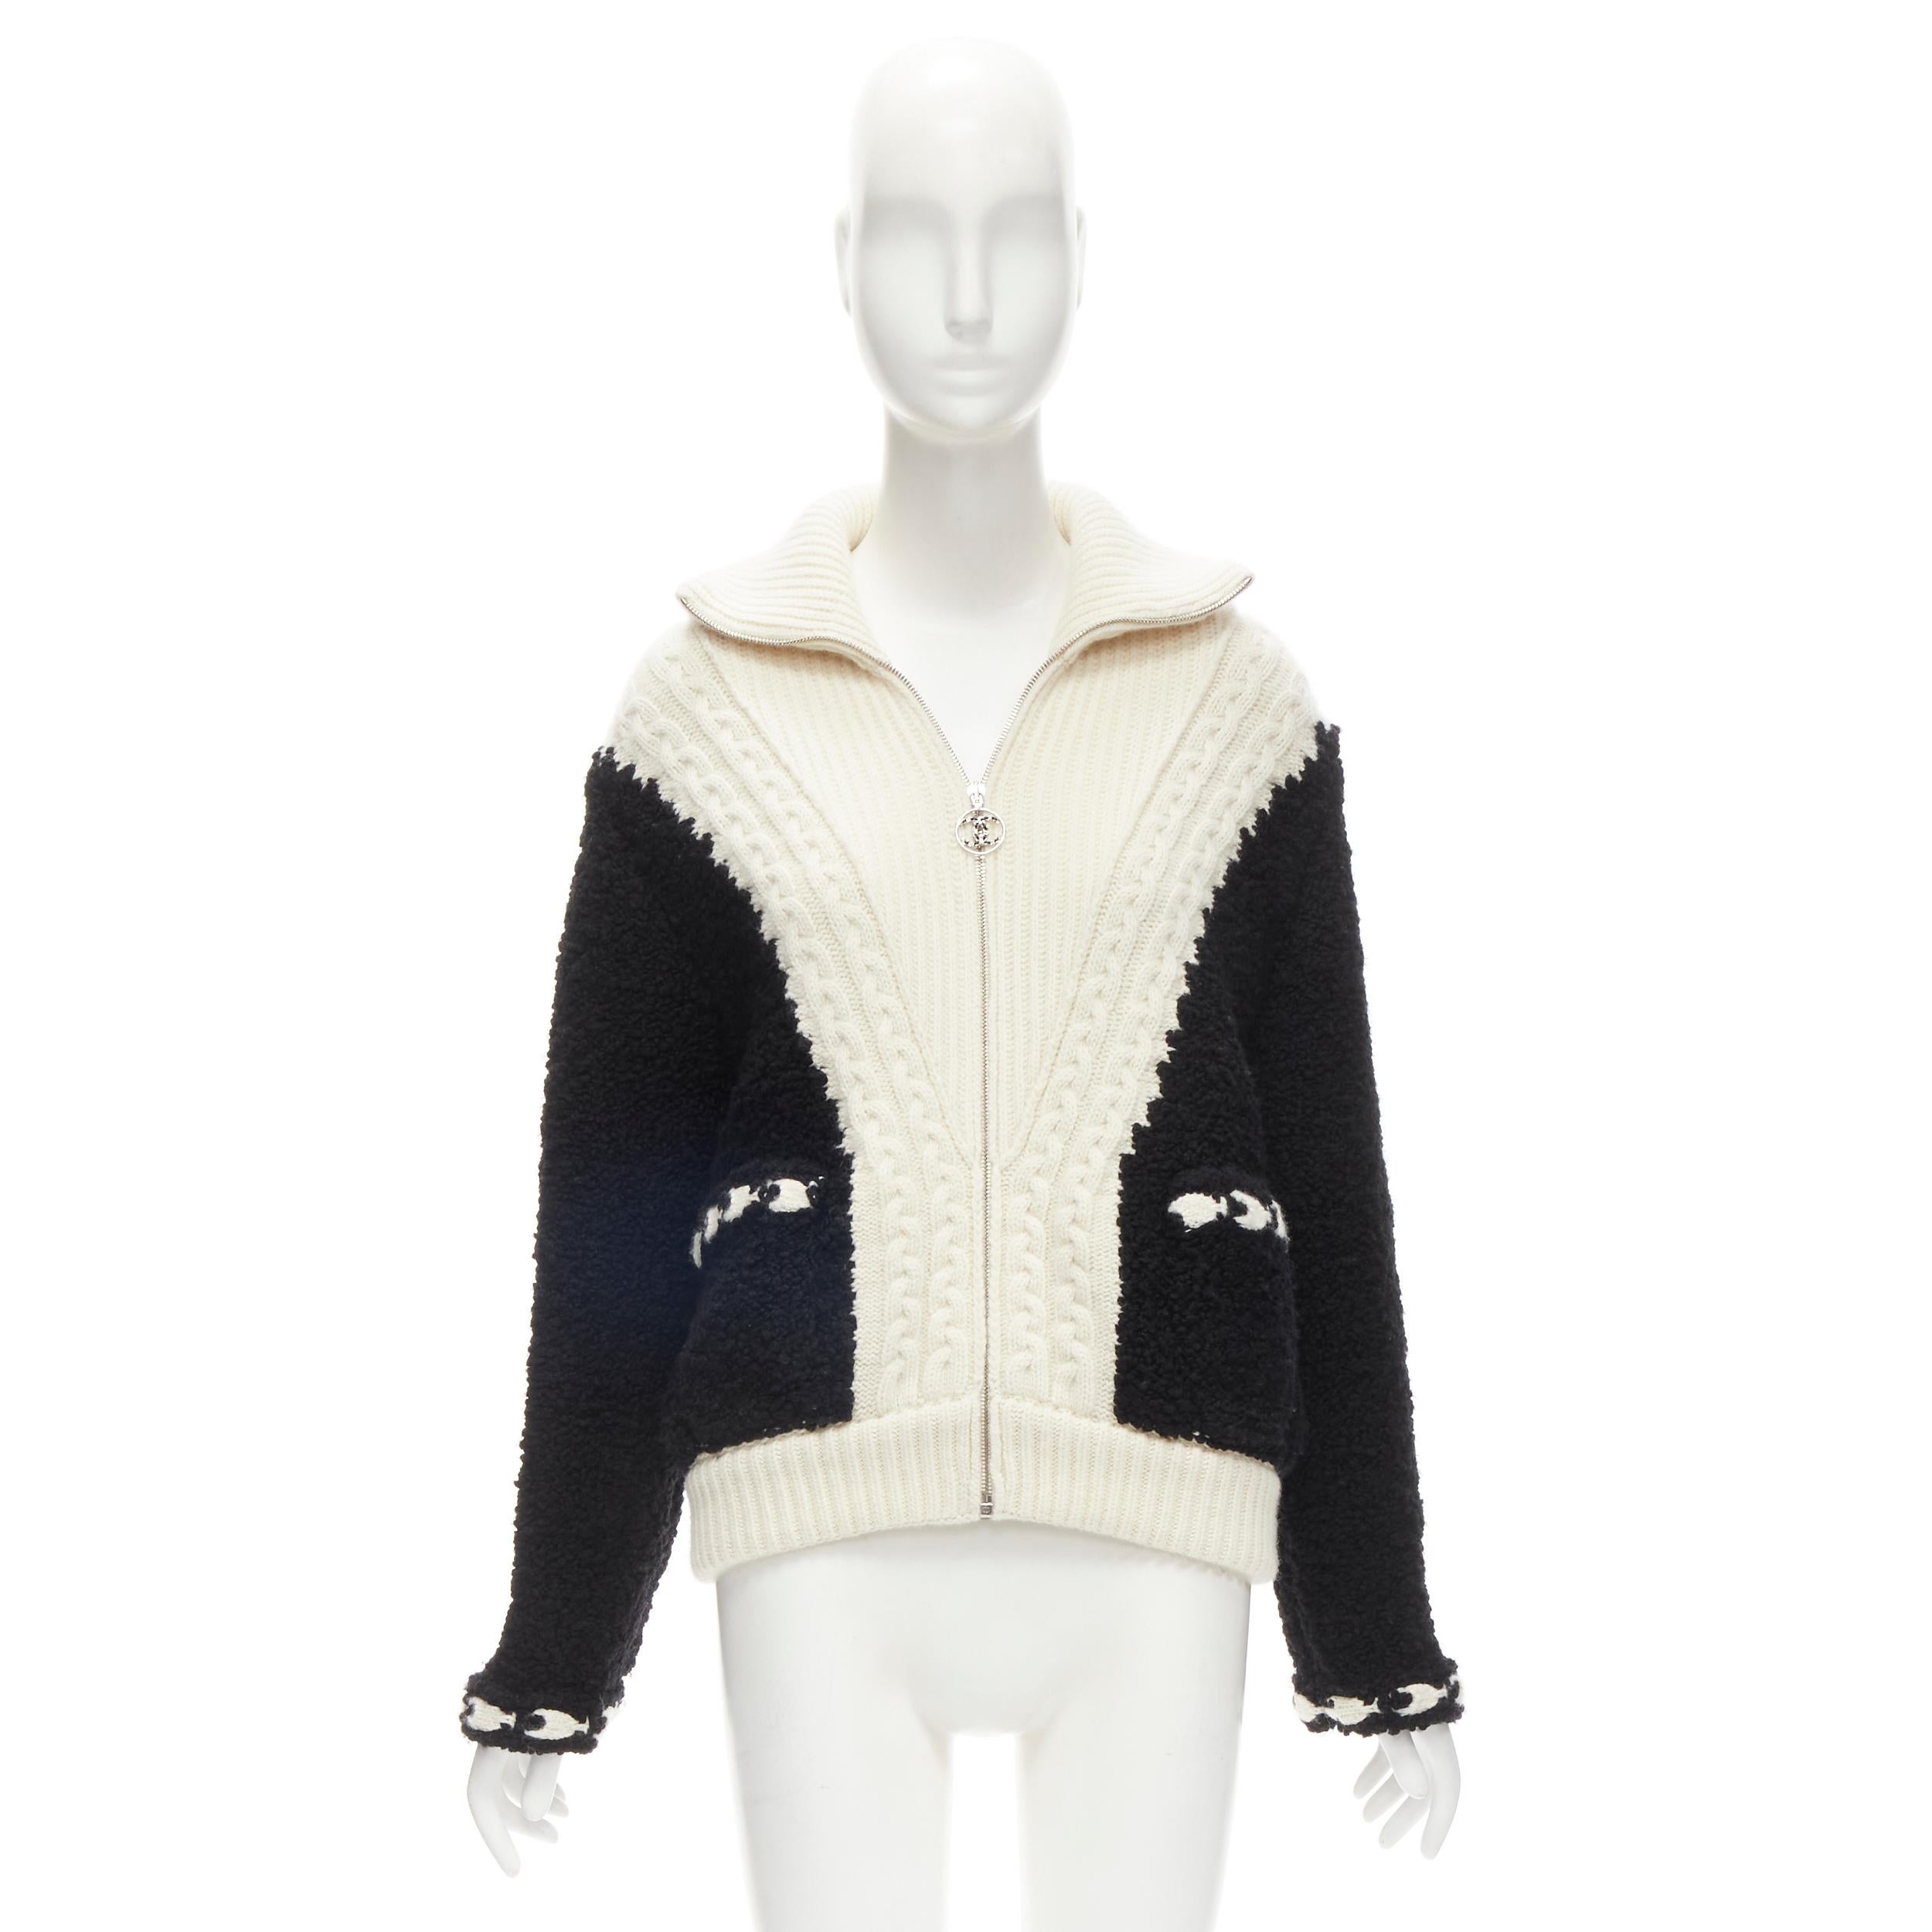 CHANEL black boucle cream cable knit faux layered cardigan jacket FR34 XS 6